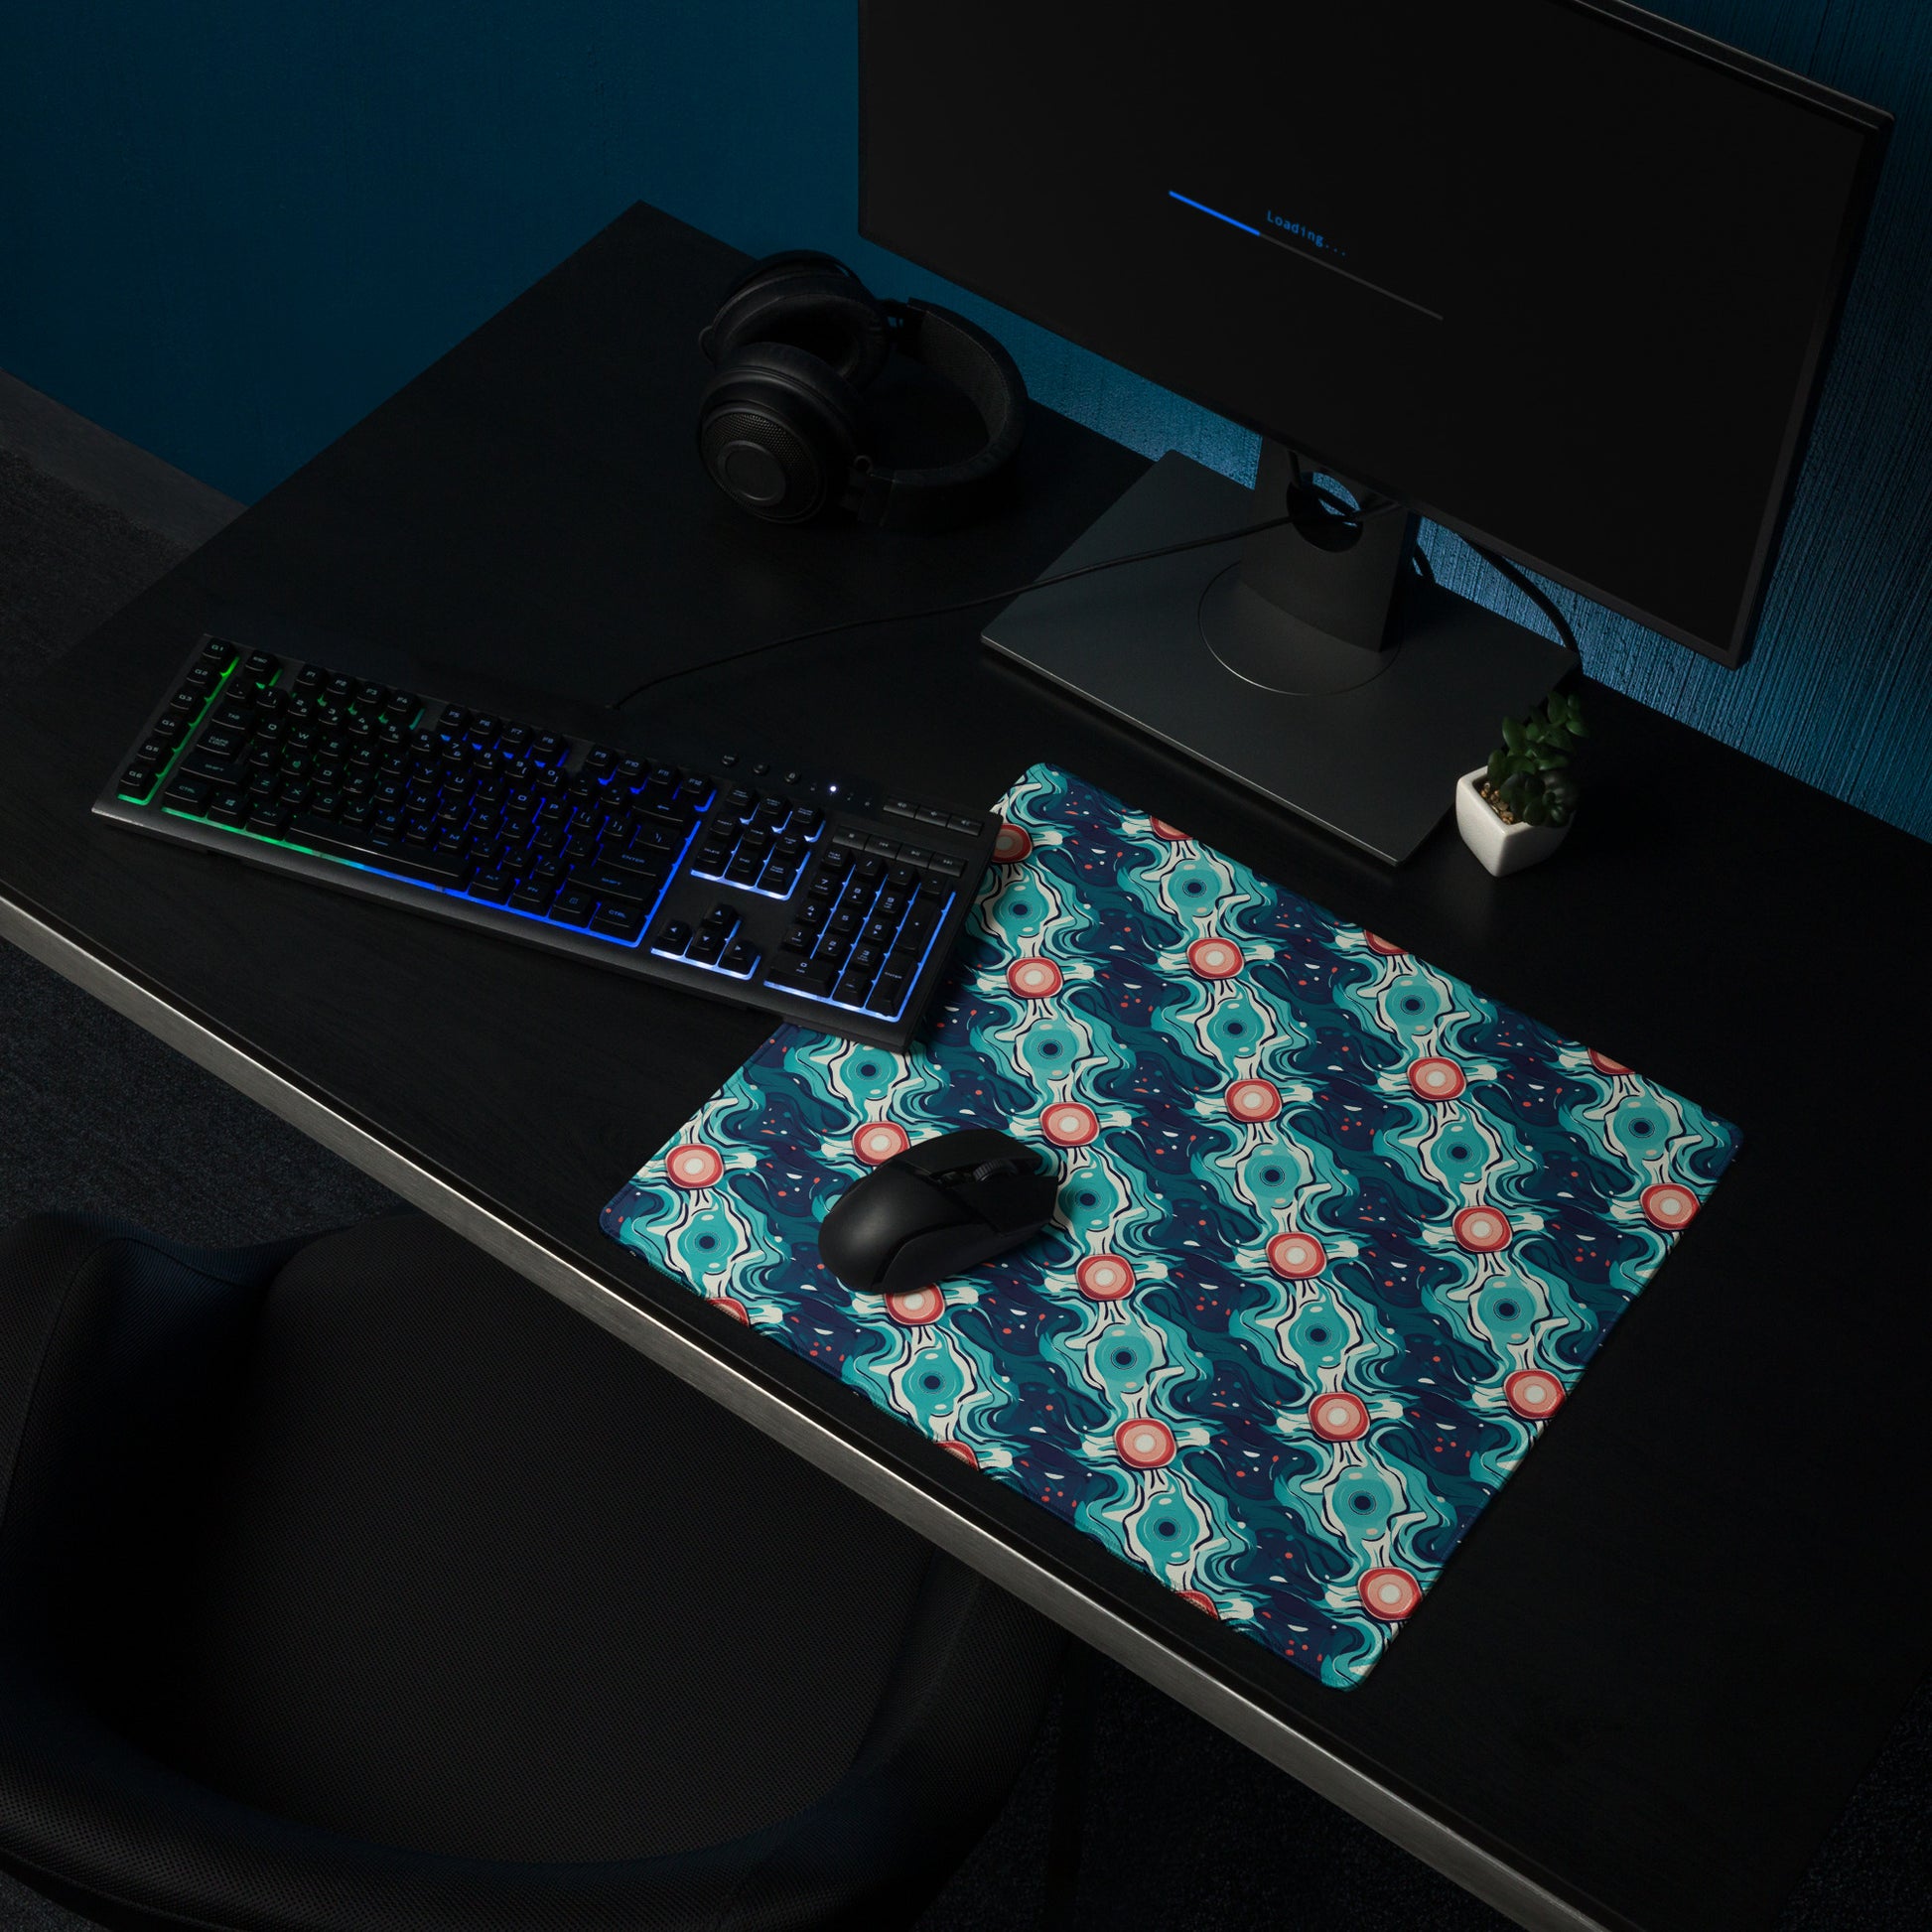 A 18" x 16" desk pad with a teal abstract wavy pattern sitting on a desk.